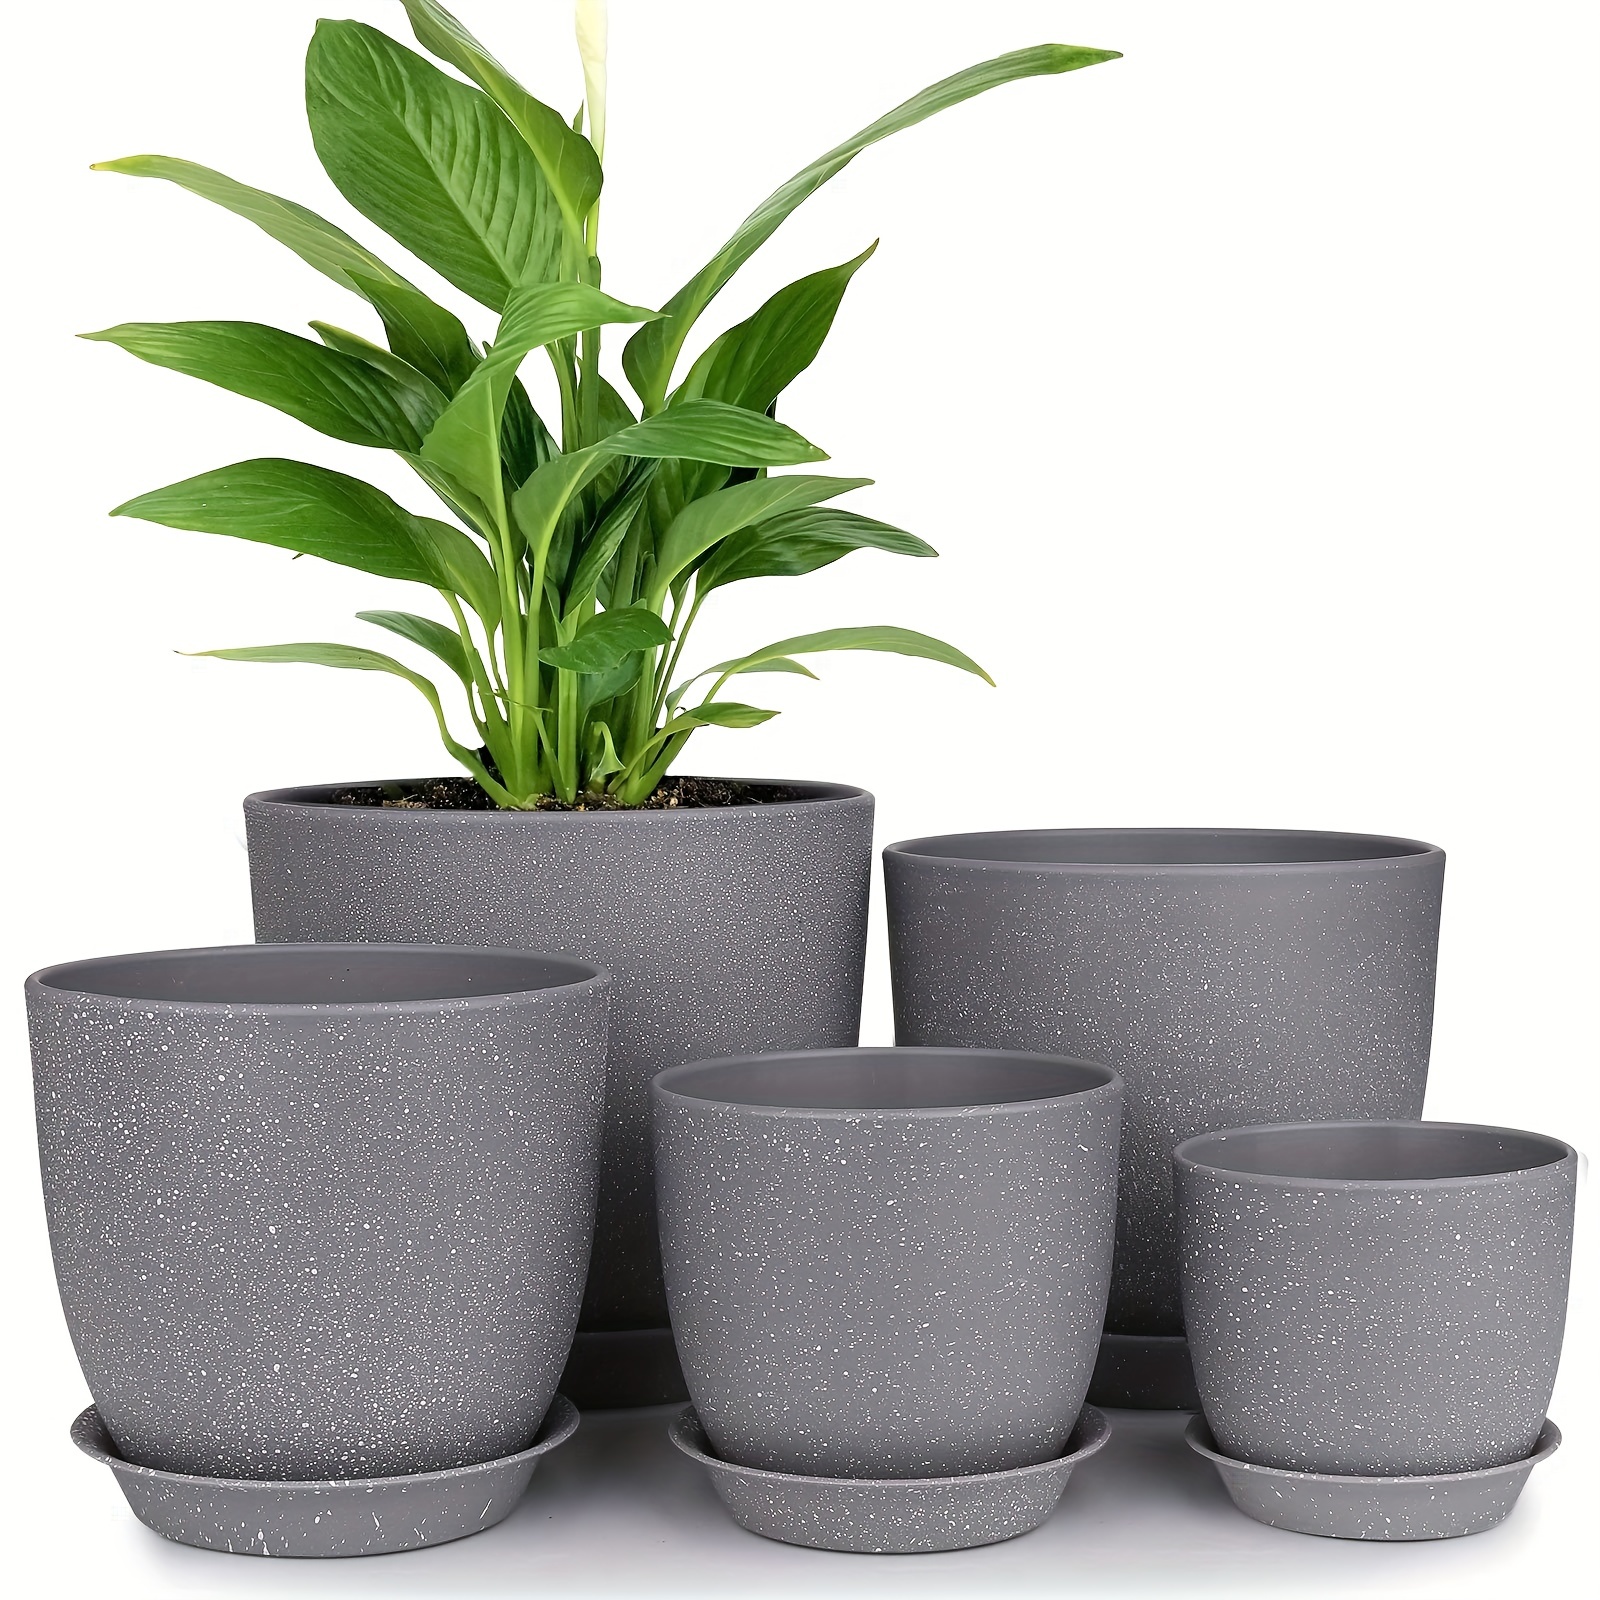 

5pcs, Plastic Planter 7/6/5.5/4.8/4.5 Inch Flower Pot Indoor Modern Decorative Plant Pots With Drain Hole And Saucer For All House Plants, Succulents, Flowers, Speckled Gray